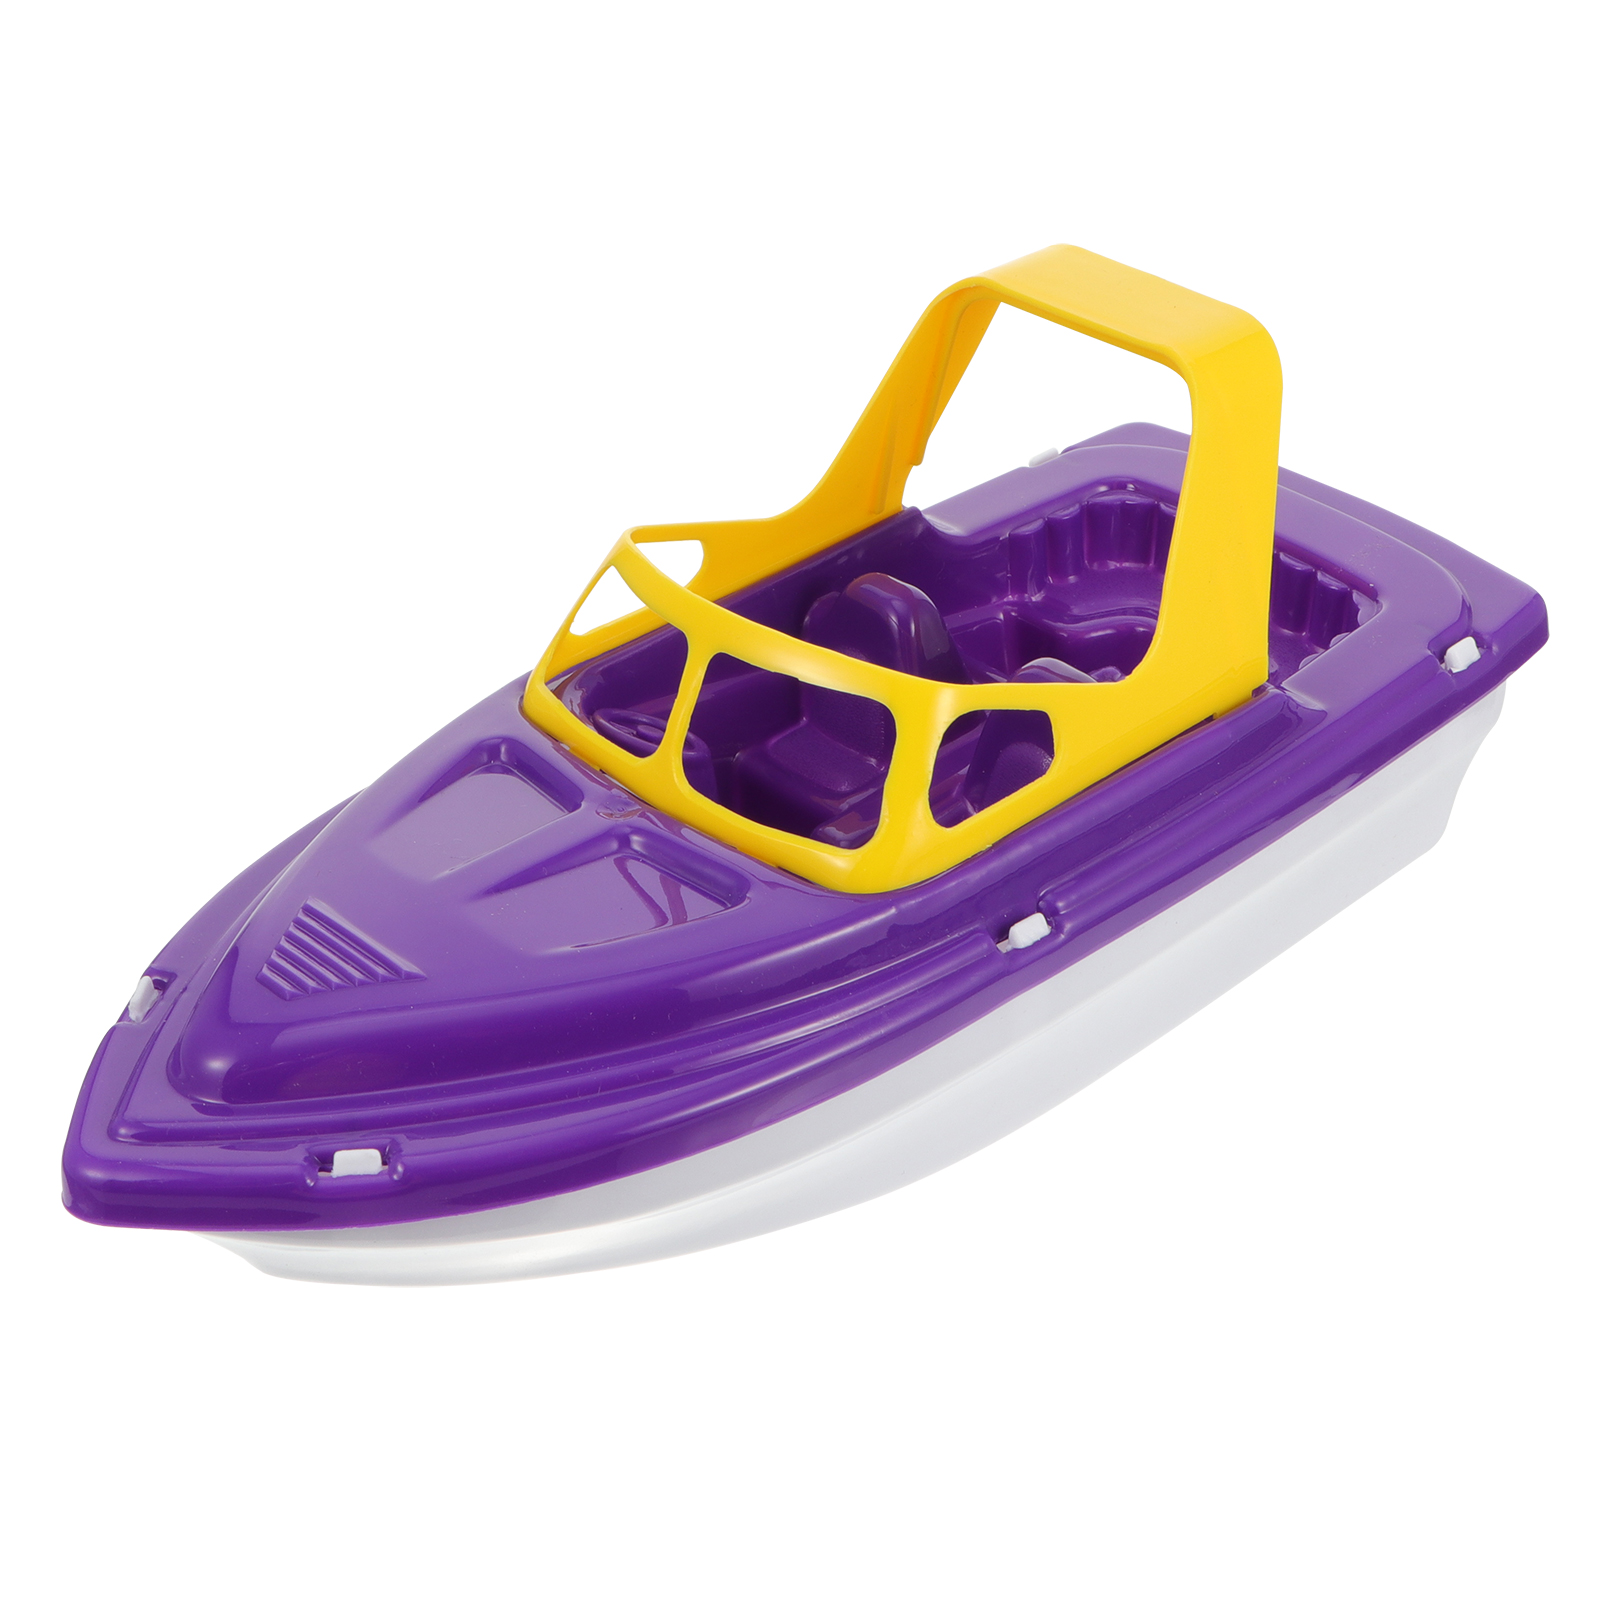 Plastic Speed Boat Ship Race Boat Toy Bathtub Shower Bath Toys Water Play Game For Children Boys Toys Gift